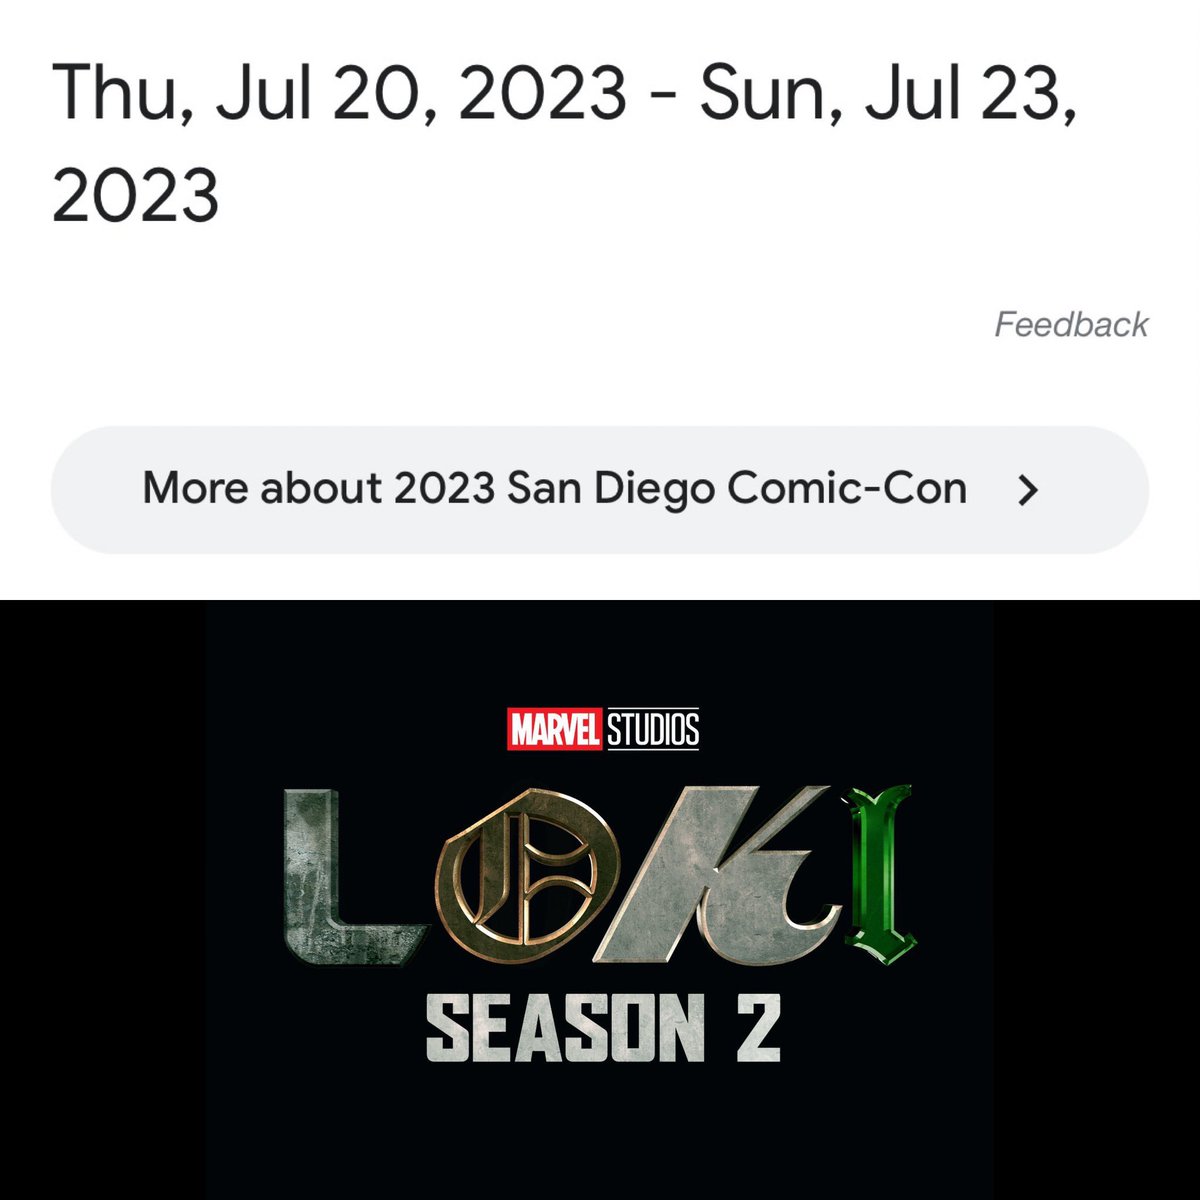 It’s exactly 31 days until SDCC!